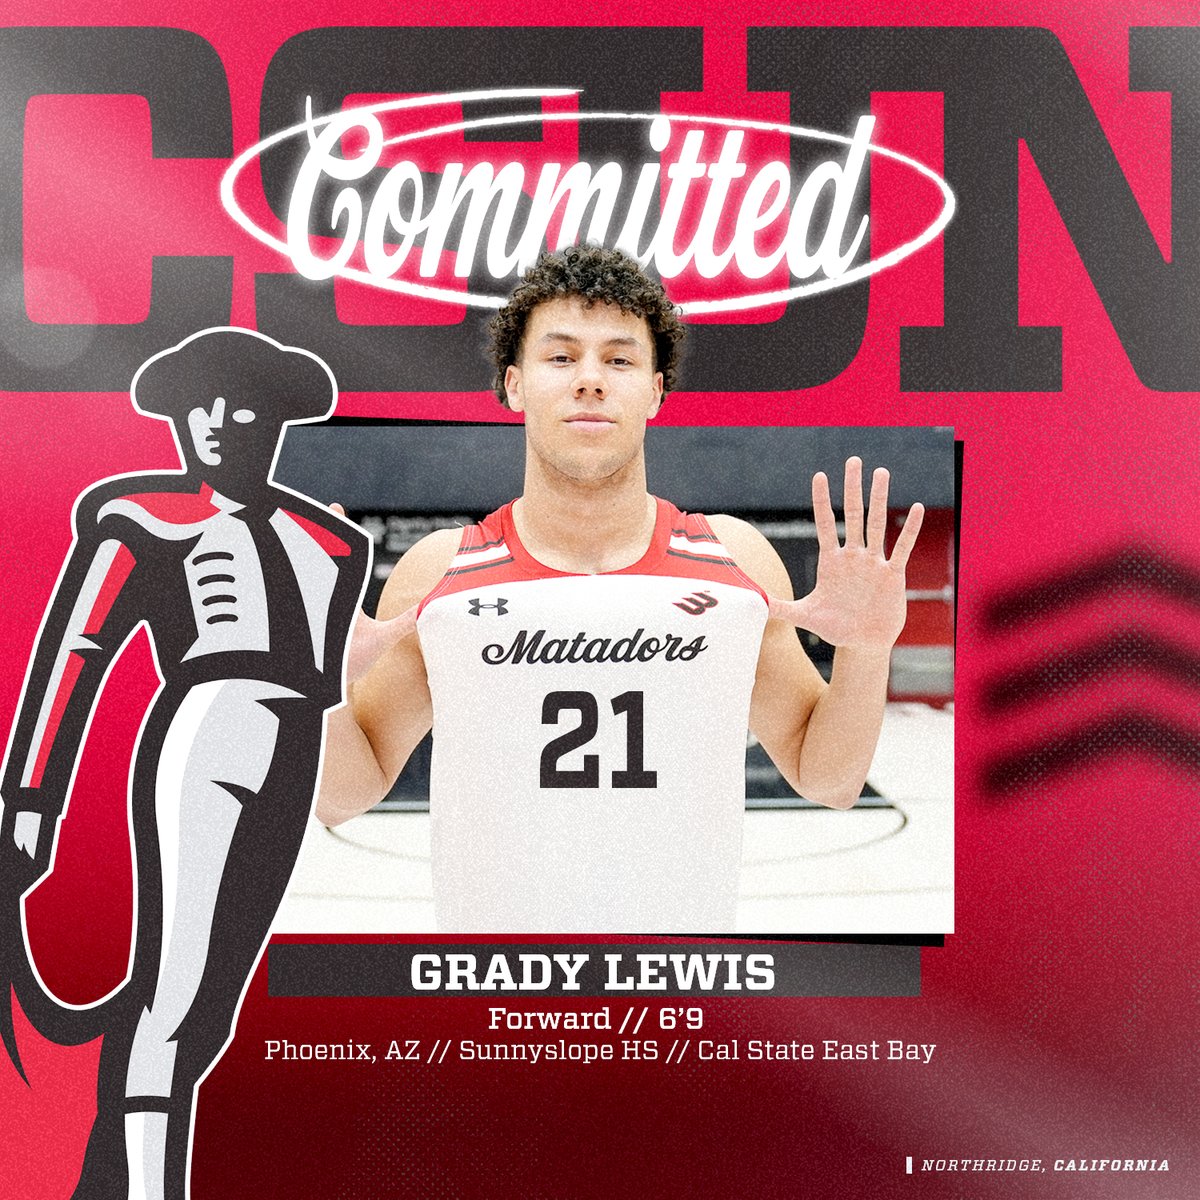 Playmaker. 🚨 @grady_lewi1 earned back-to-back All-CCAA First Team honors at Cal State East Bay, averaging 14.3 points and 7.1 rebounds across two seasons. #GoMatadors